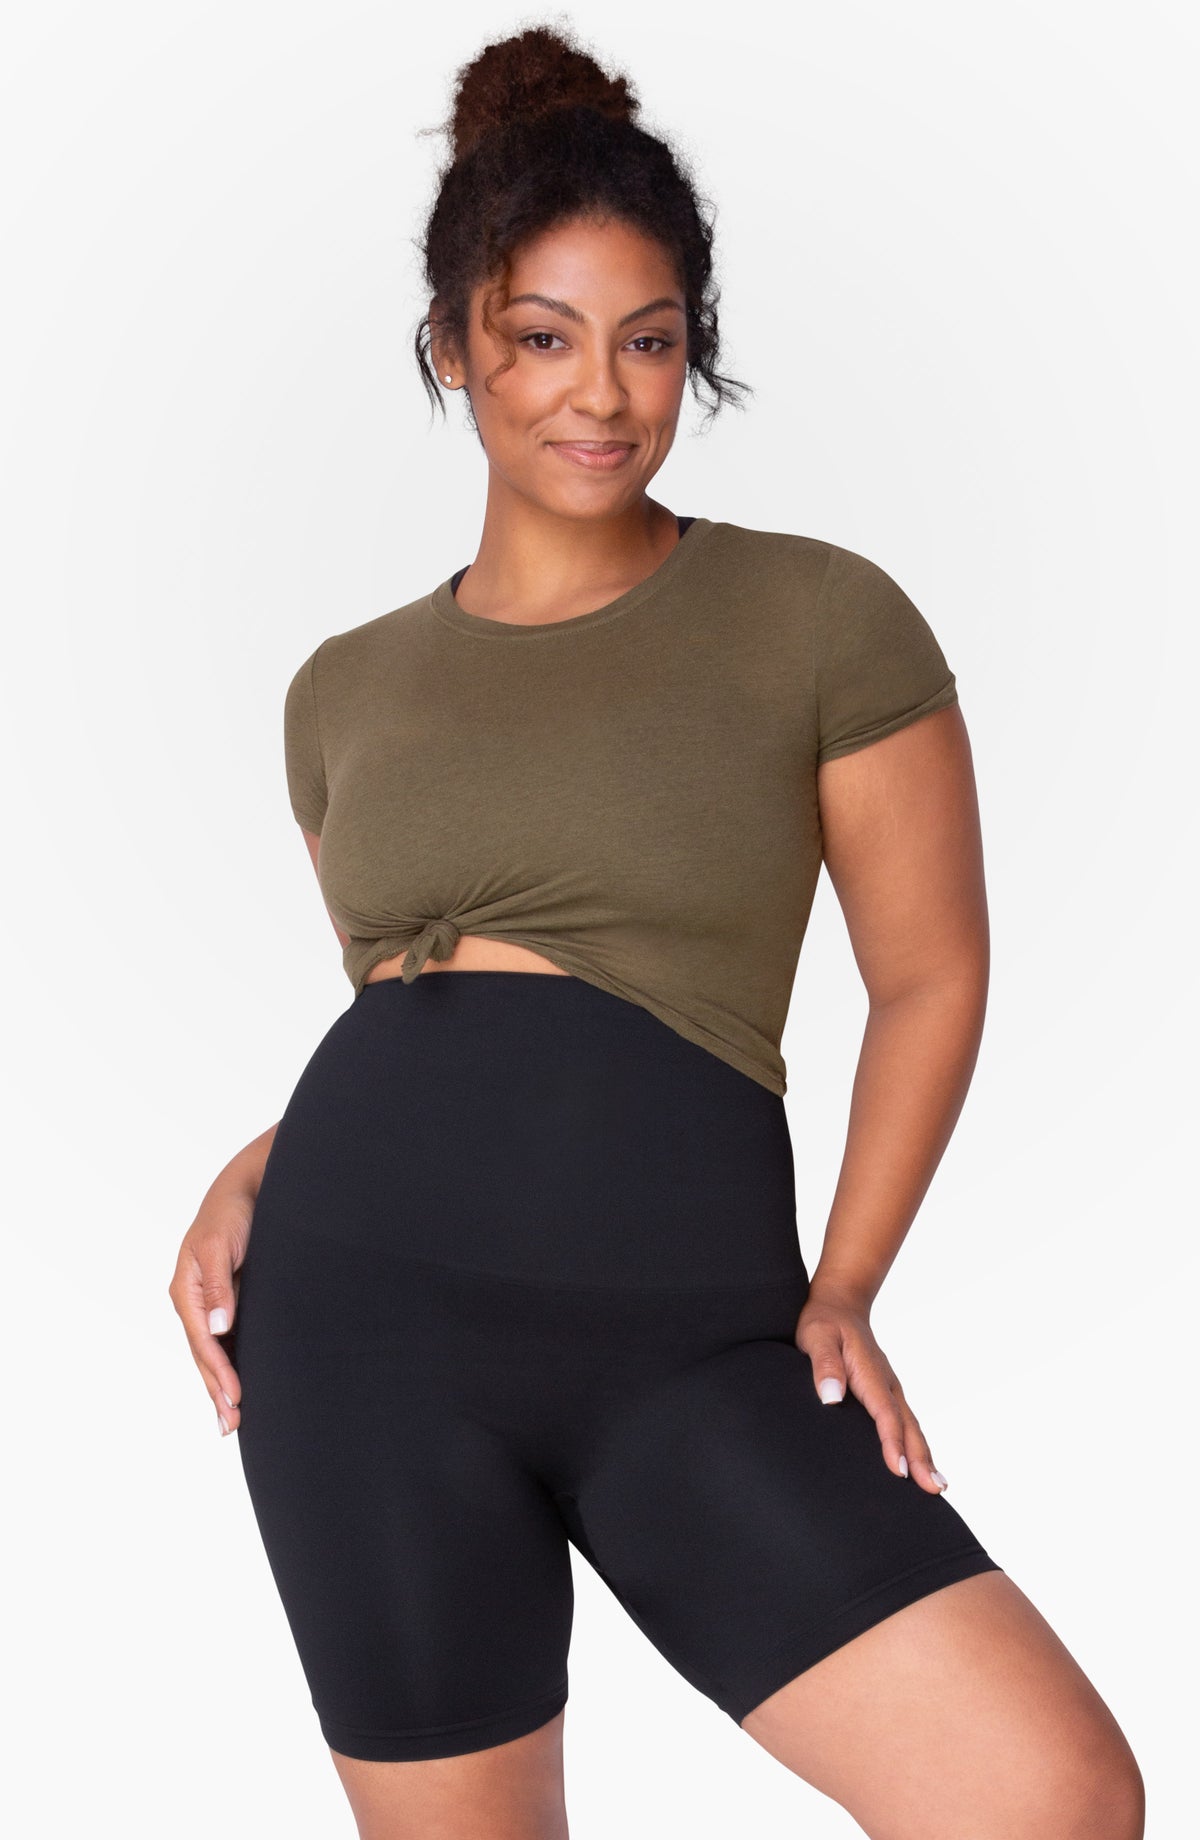  Customer reviews: Belly Bandit – Mother Tucker Postpartum  Compression Leggings – High Waisted Support Leggings for Women After Birth  – Discreet Breathable Postpartum Pants Smooth Tummy, Tush and Thighs,  Medium, Black